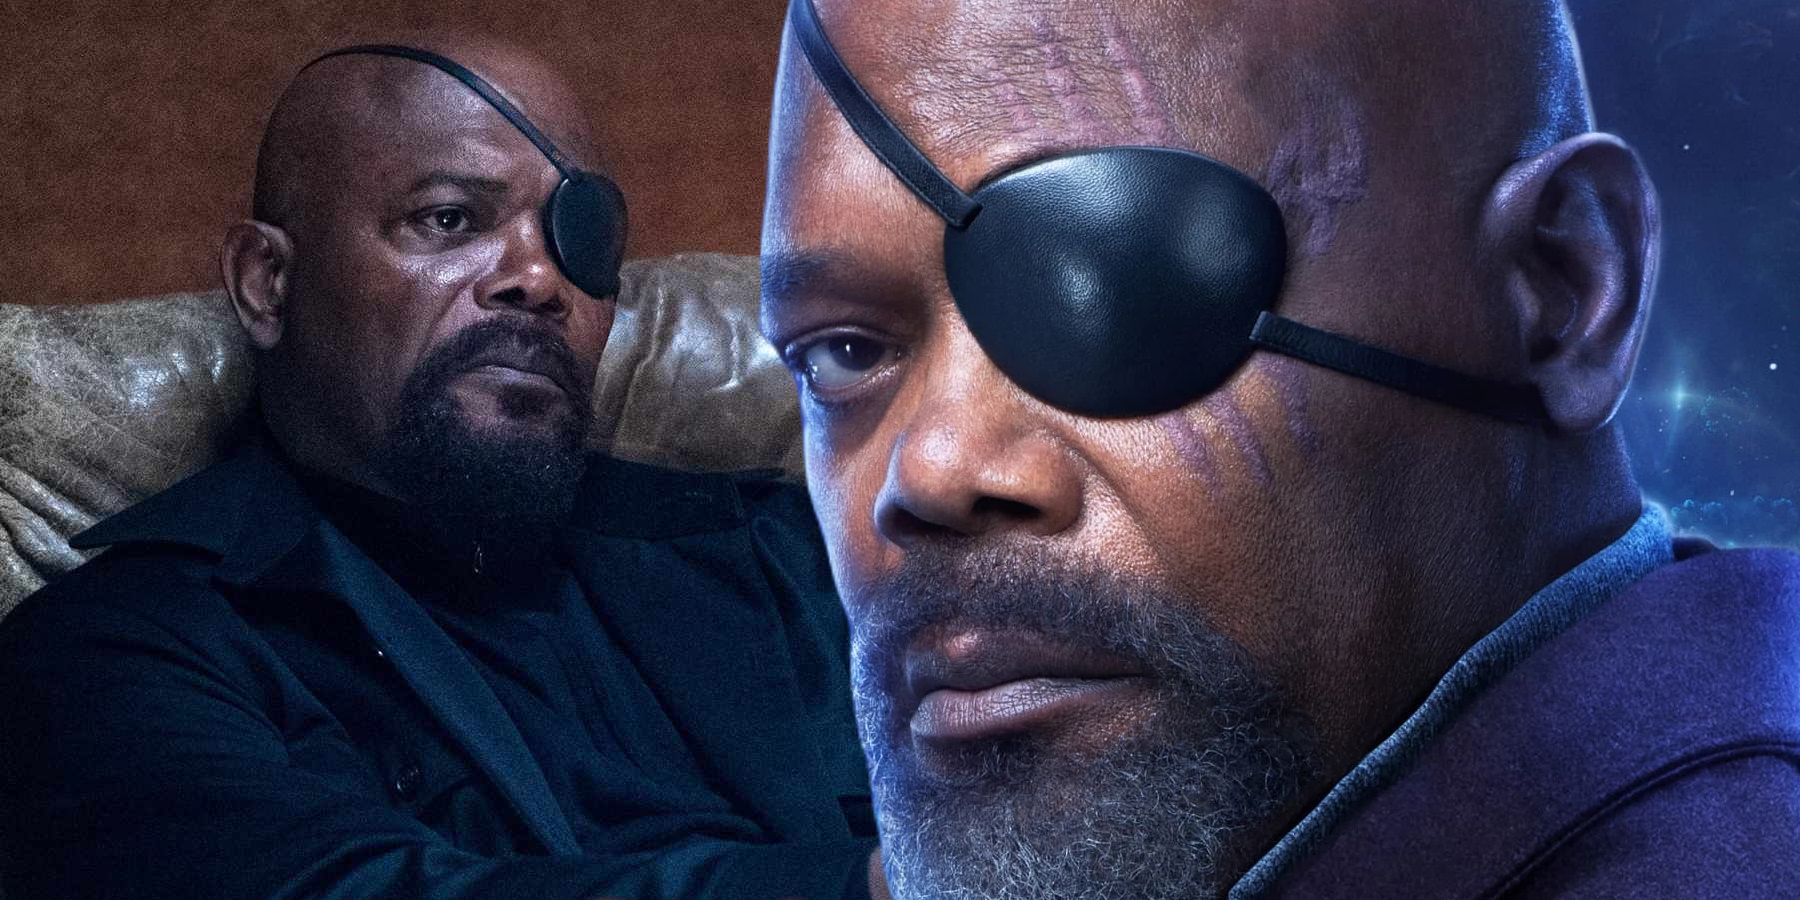 Split: Samuel L. Jackson as Nick Fury in Spider-Man: Far From Home and The Marvels